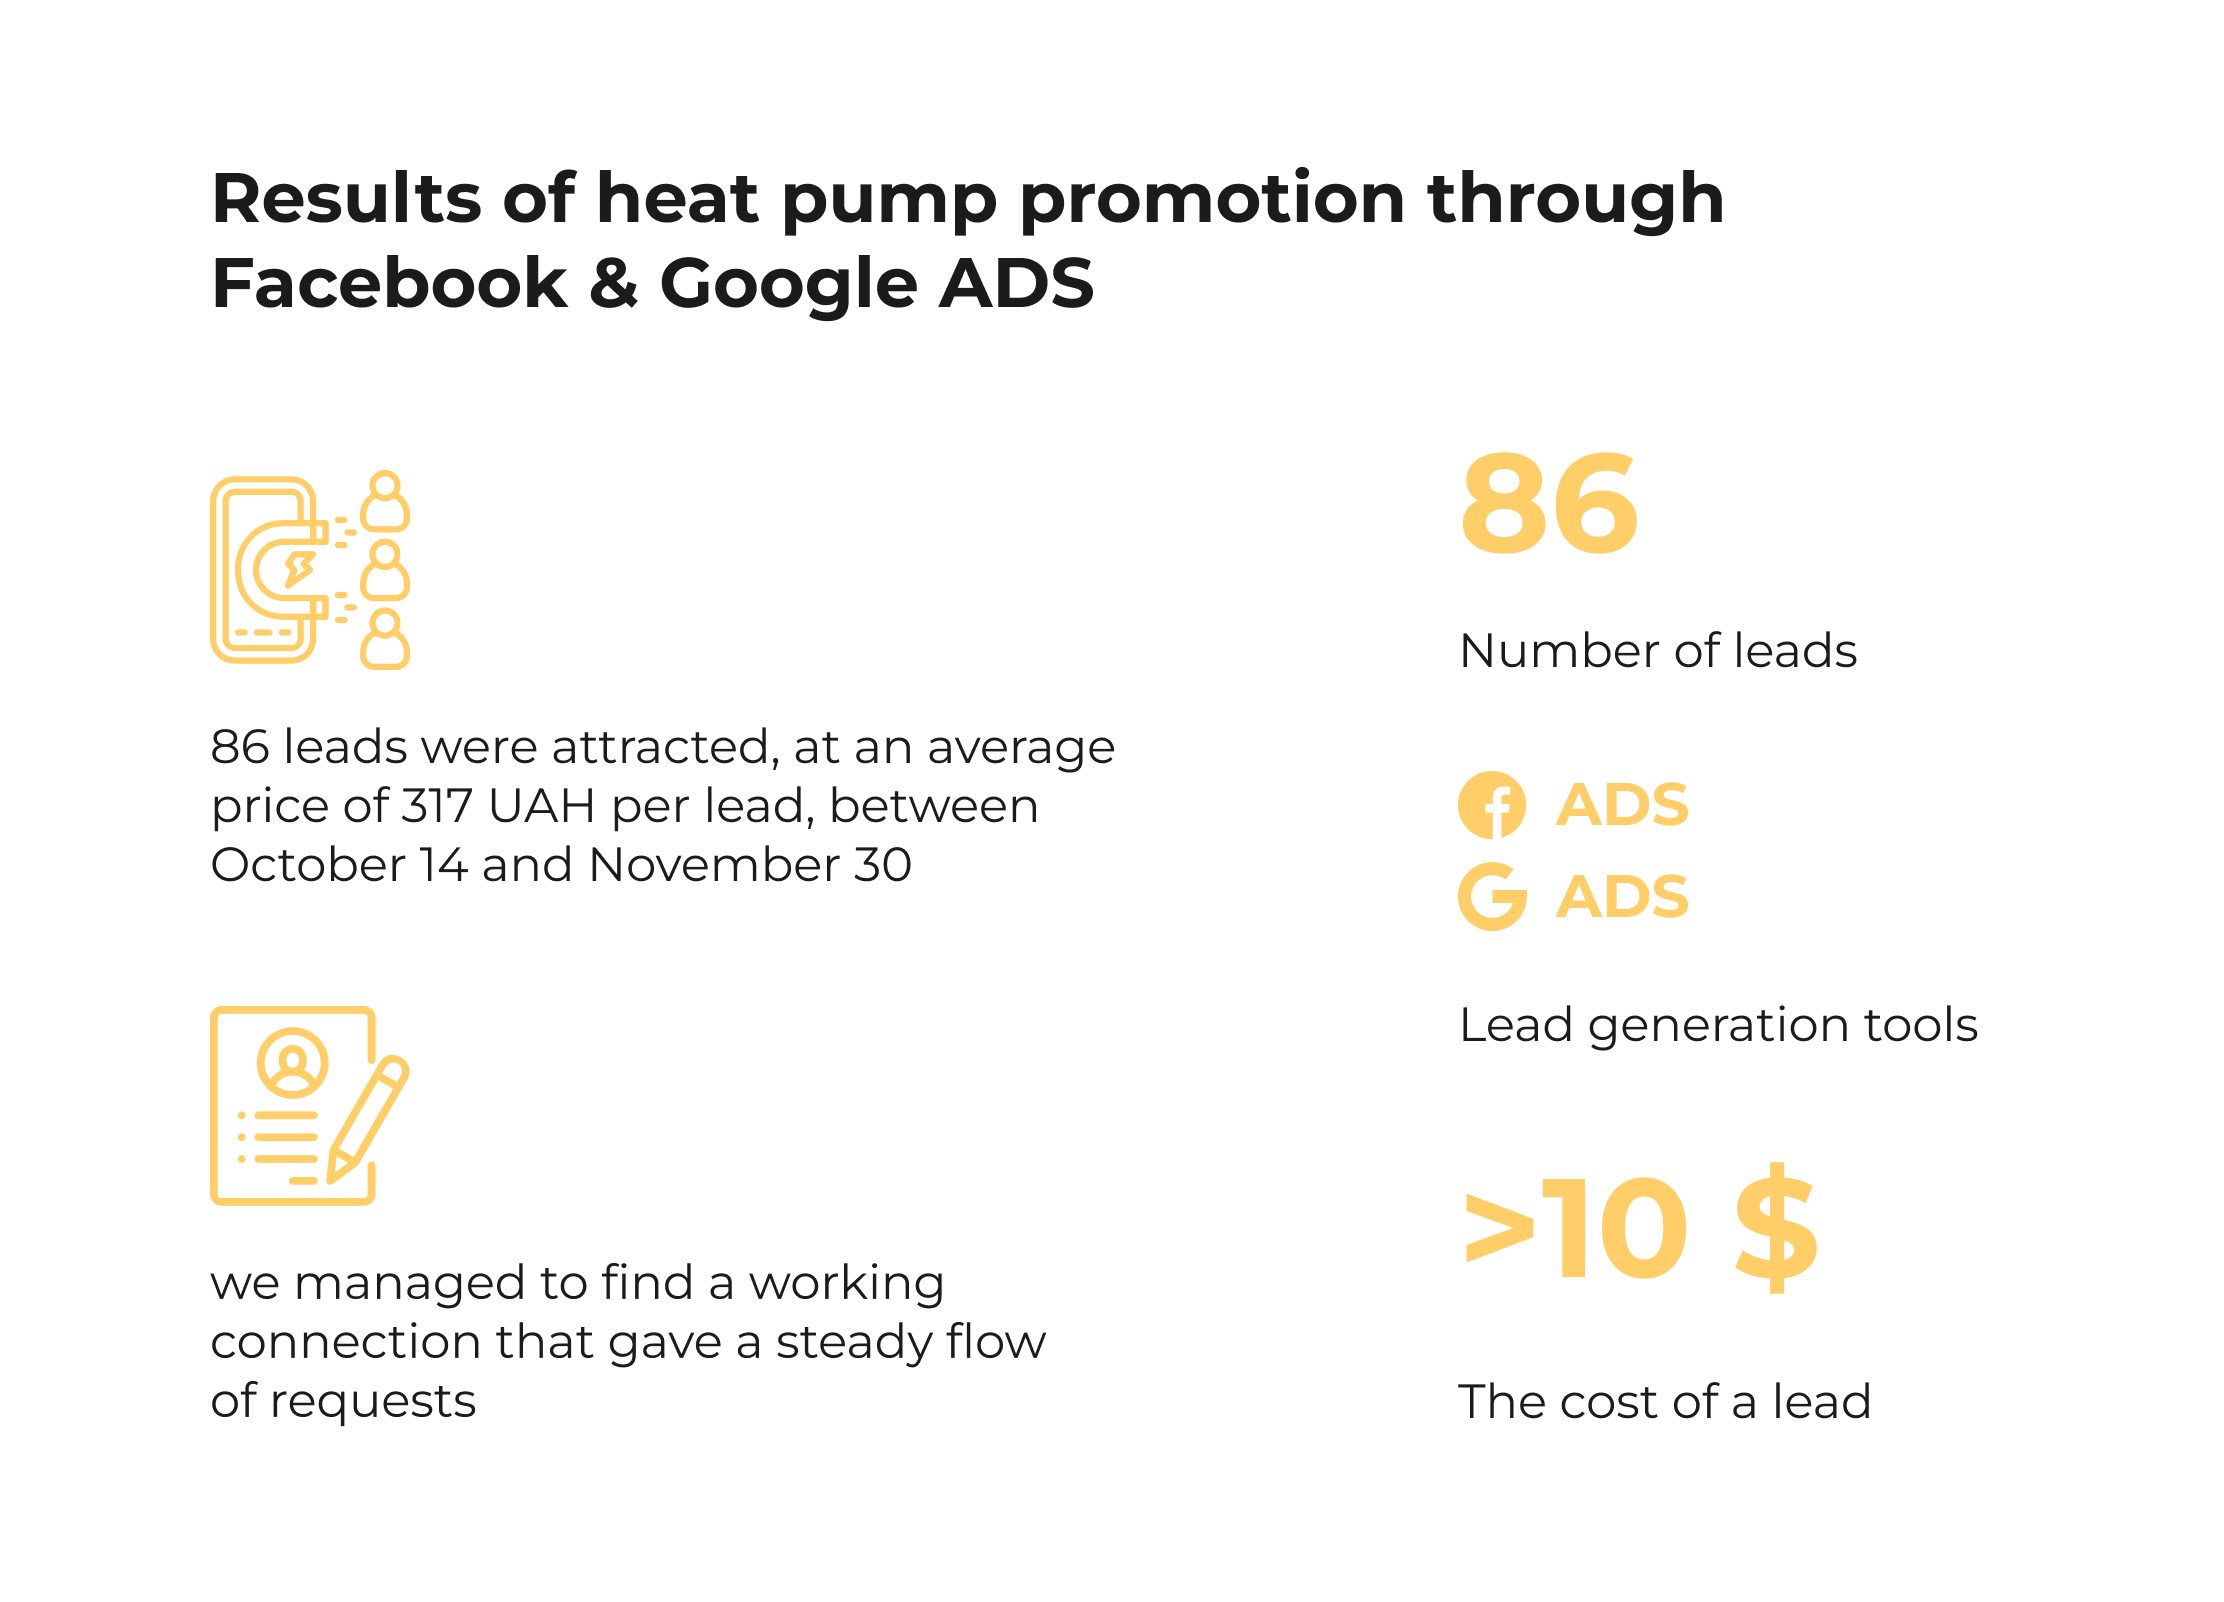 How we set up a lead generation to sell heat pumps and got 86 leads in 2 weeks